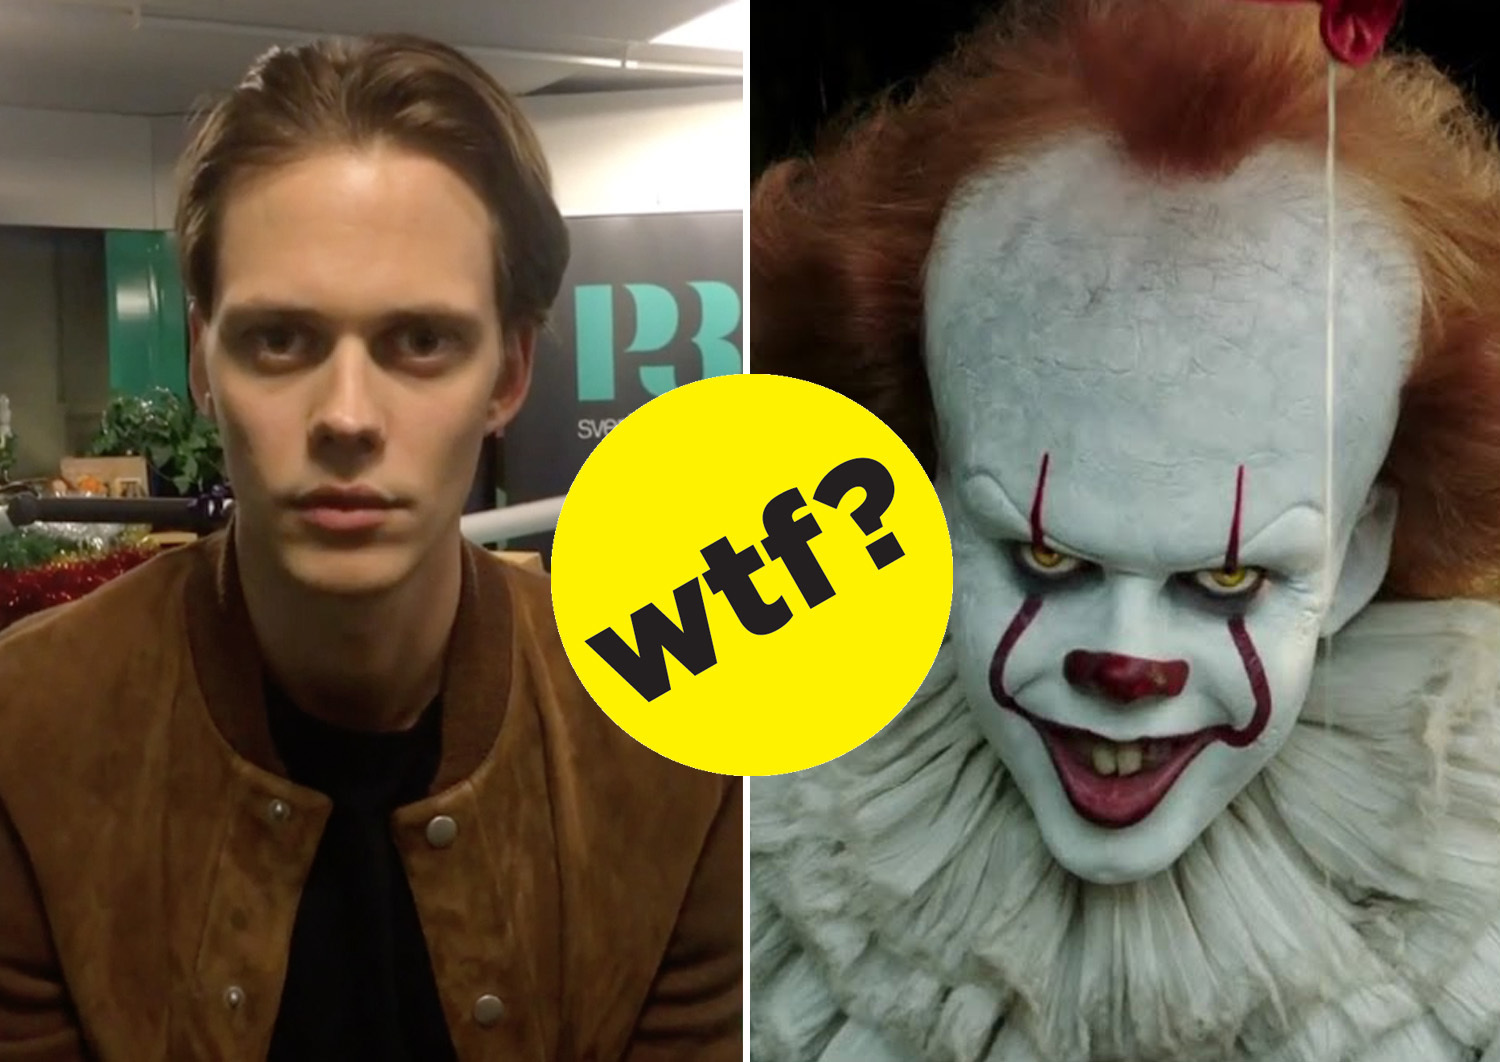 pennywise actor photo